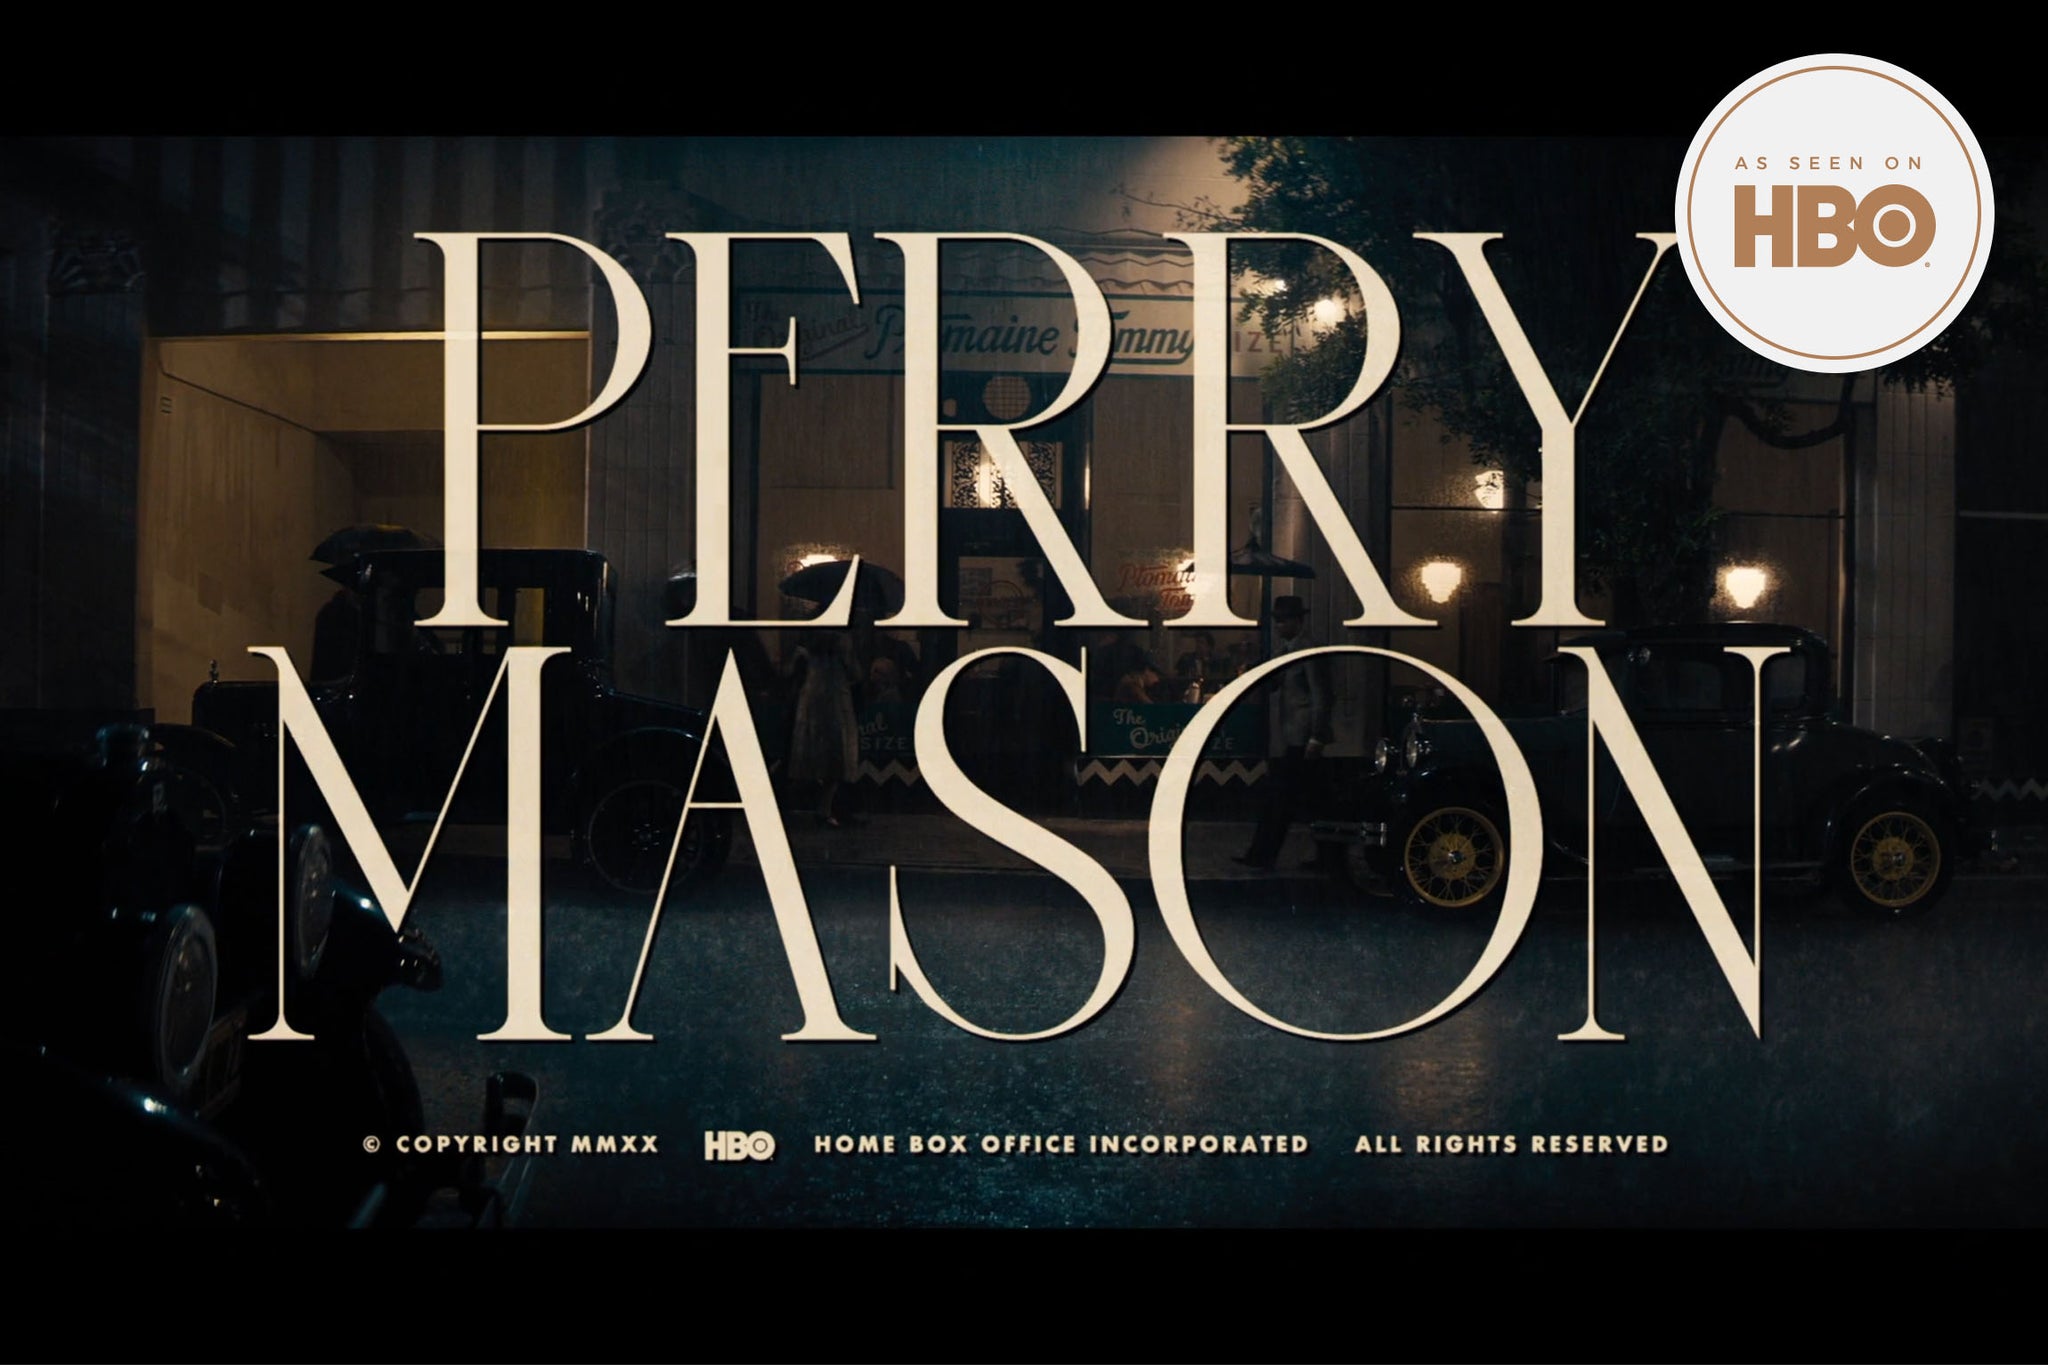 Award-winning Art Deco Typeface - Perry Mason HBO show title sequence